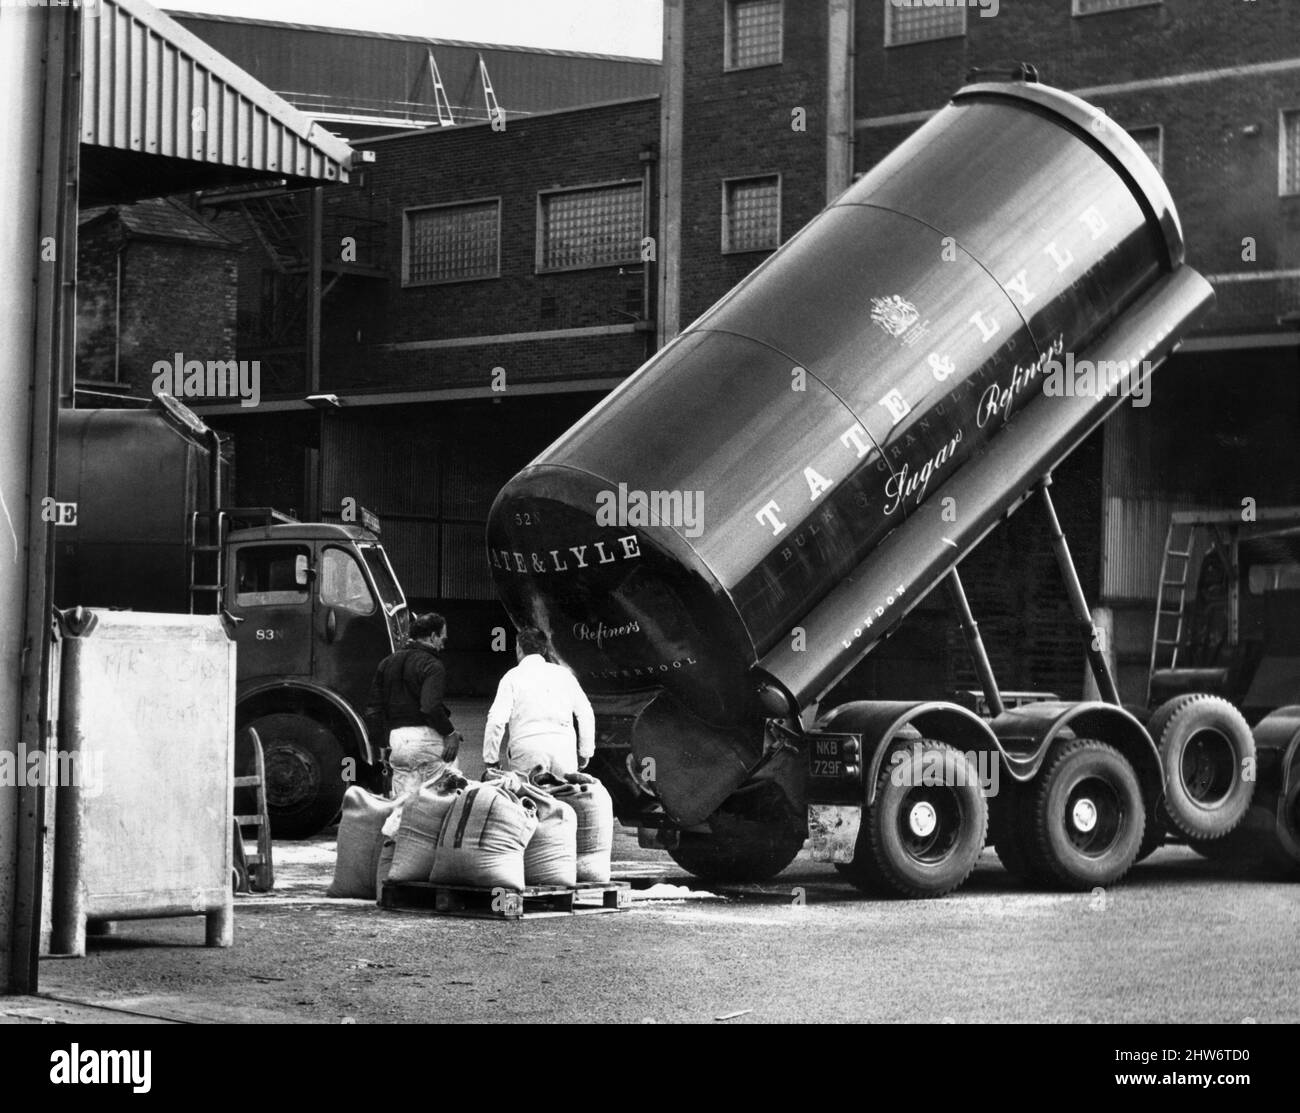 Work in progress at the Tate and Lyle sugar refinery in Love Lane near the docks in Liverpool after haulage drivers returned to work.8th April 1968. Stock Photo